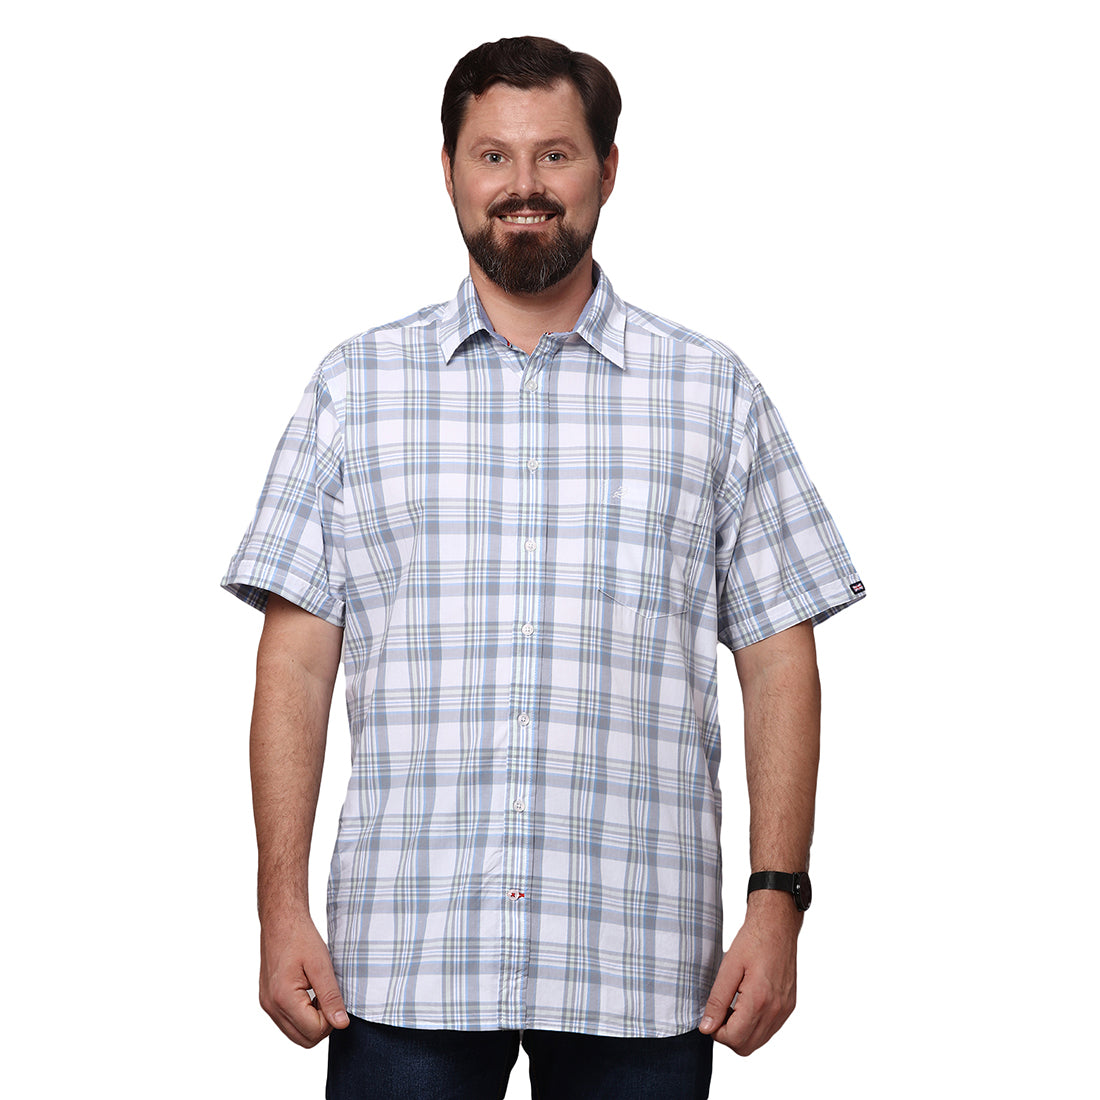 Big & Bold Checks Grey Half Sleeves Slim Fit Casual Shirts (Plus Size) - Double Two